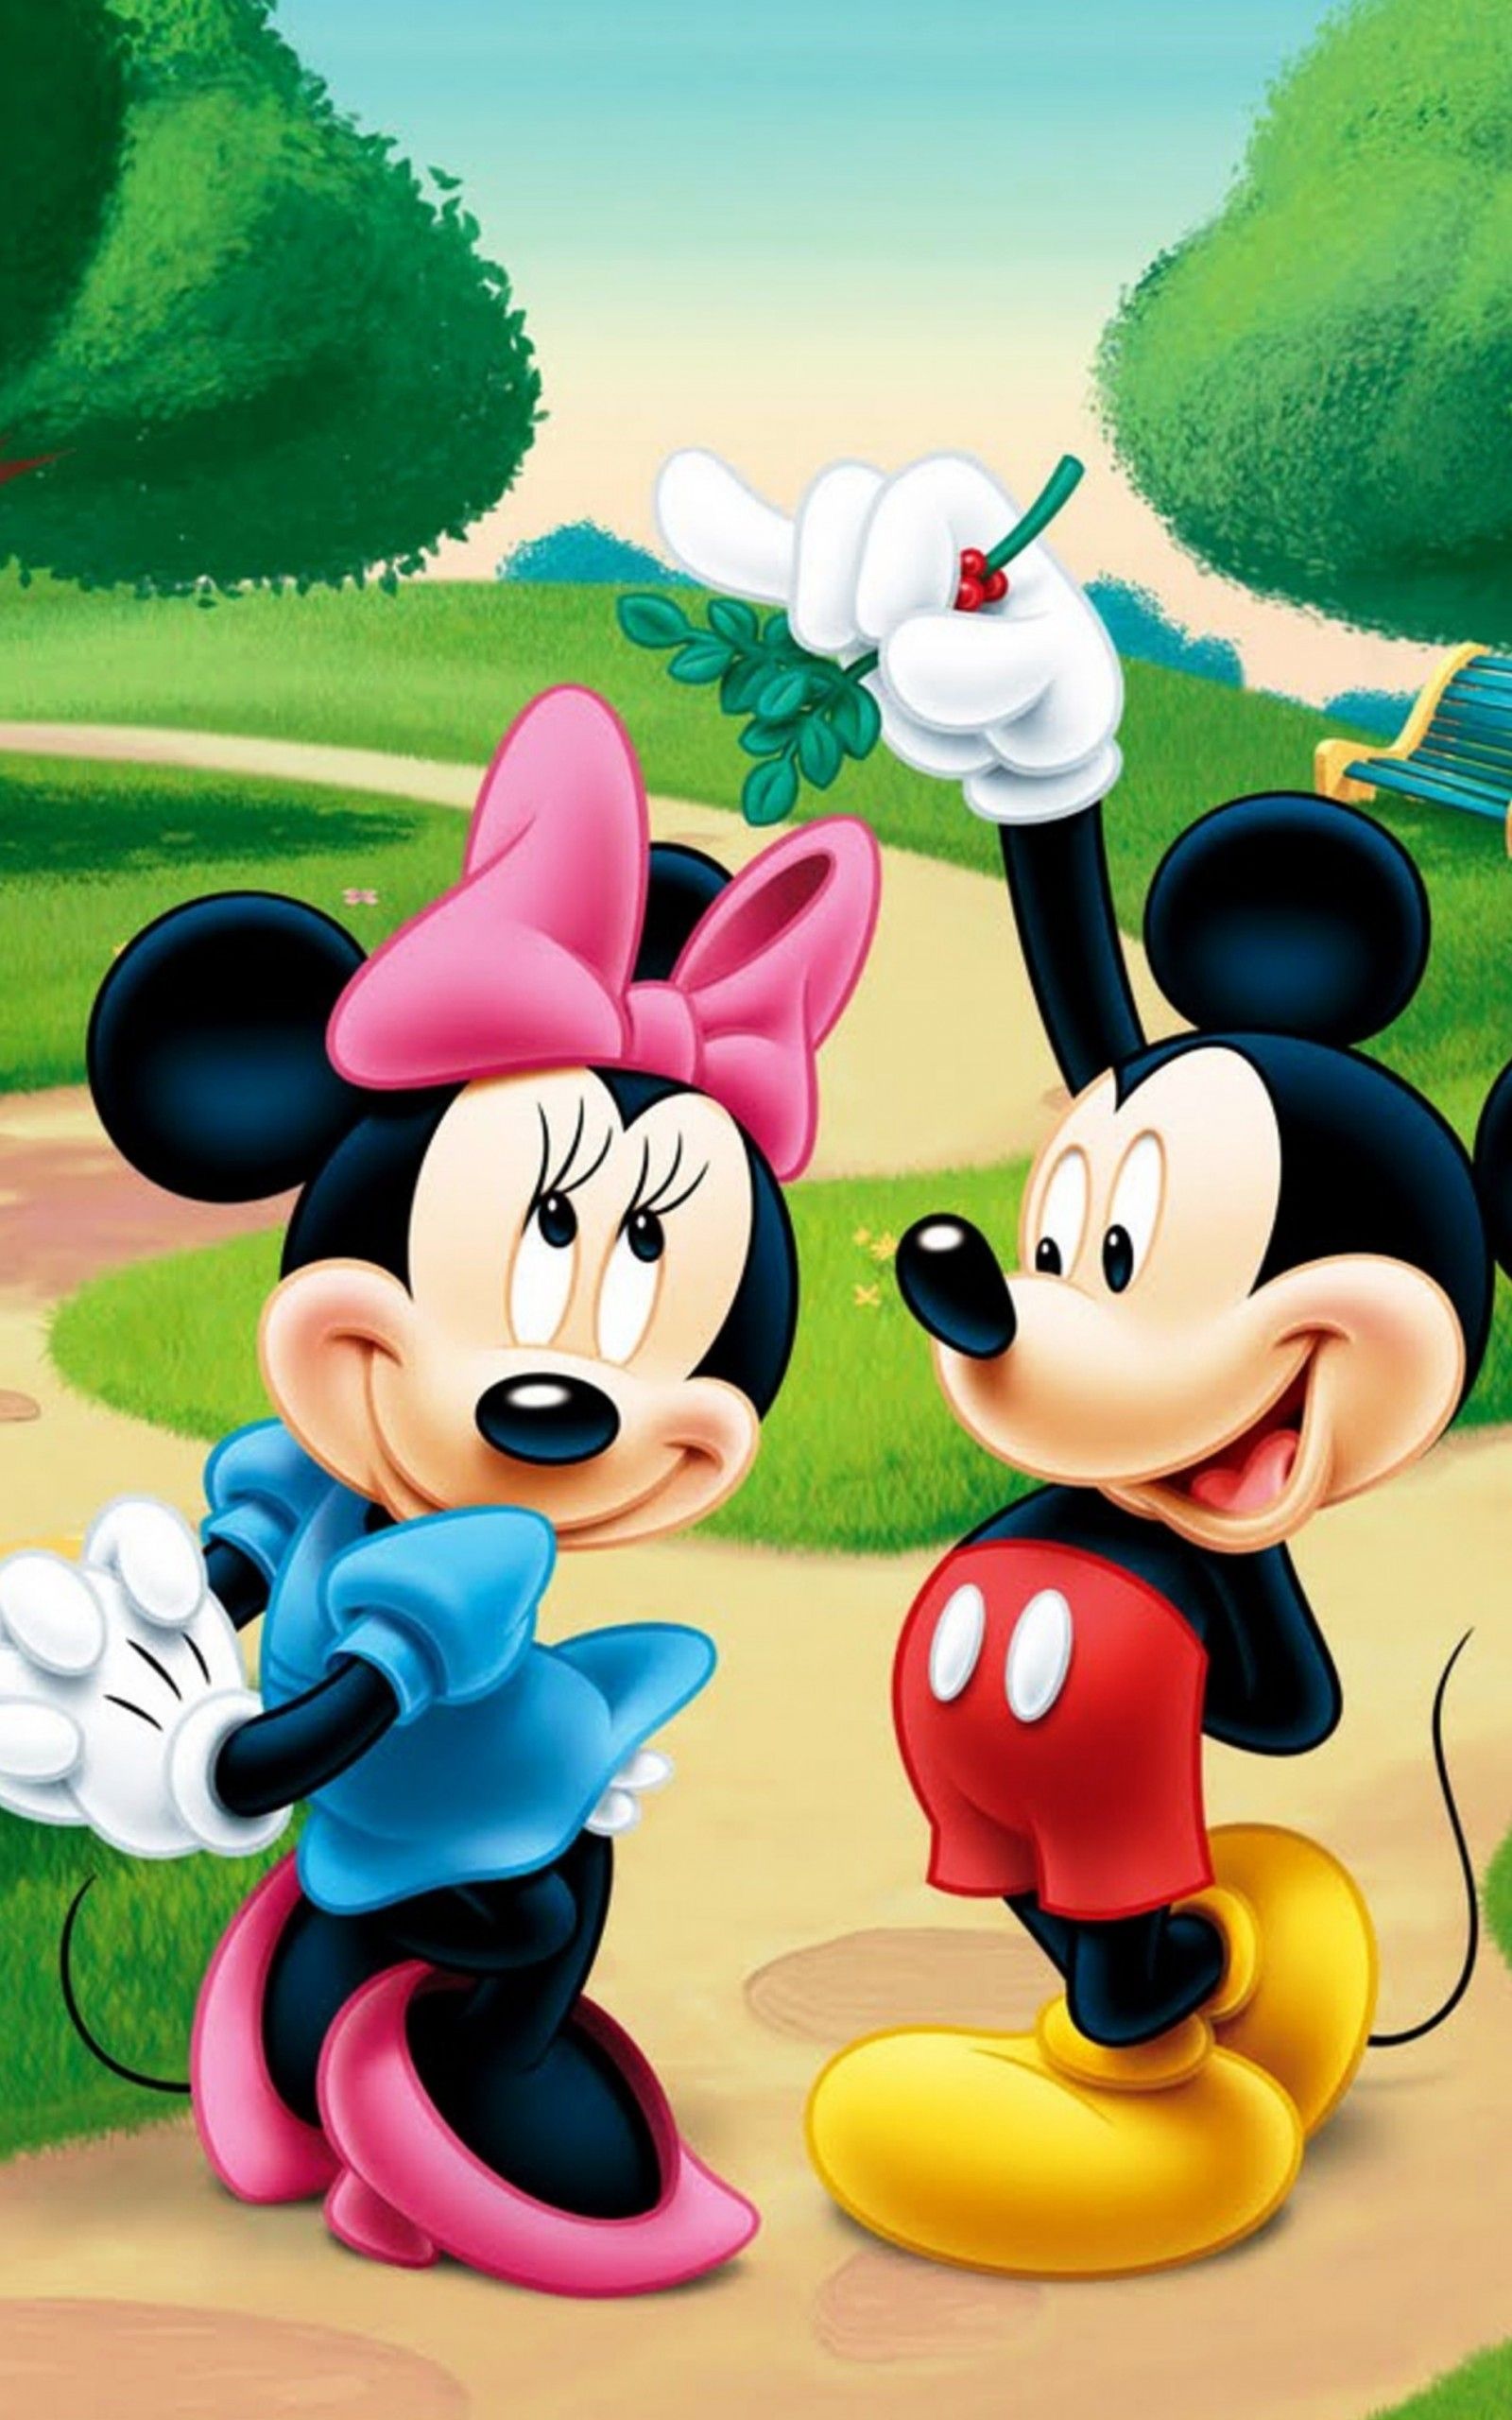 Mickey Mouse Image For Dp